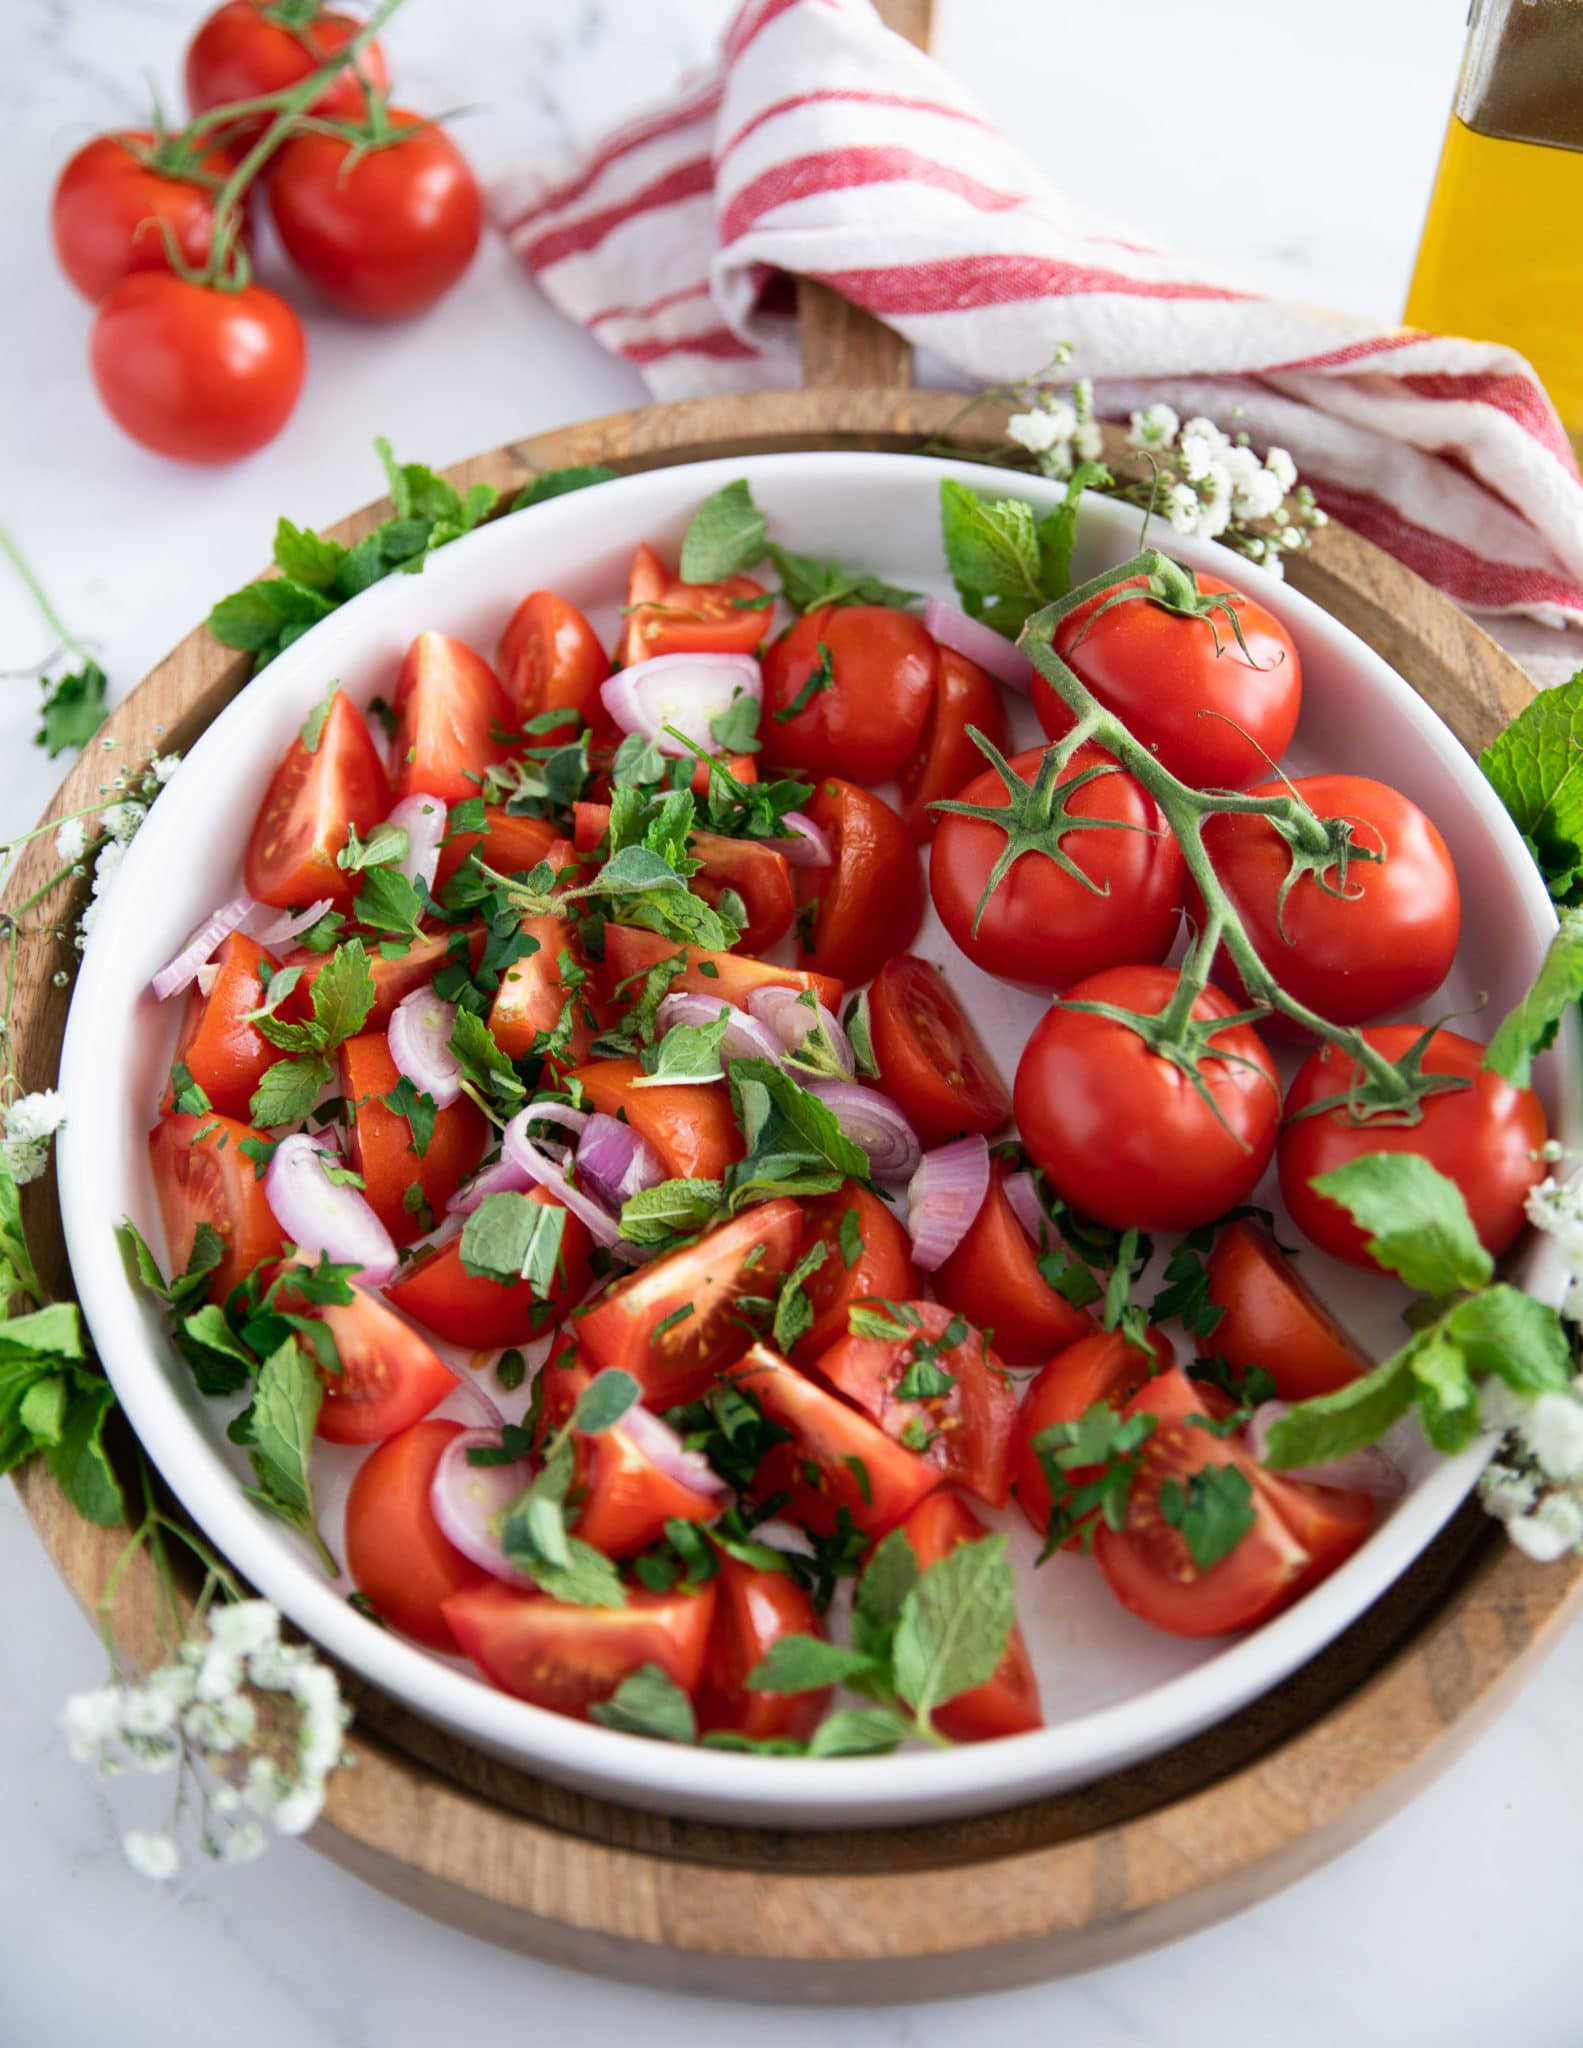 thinly sliced shallots and fresh herbs are added over the tomatoes